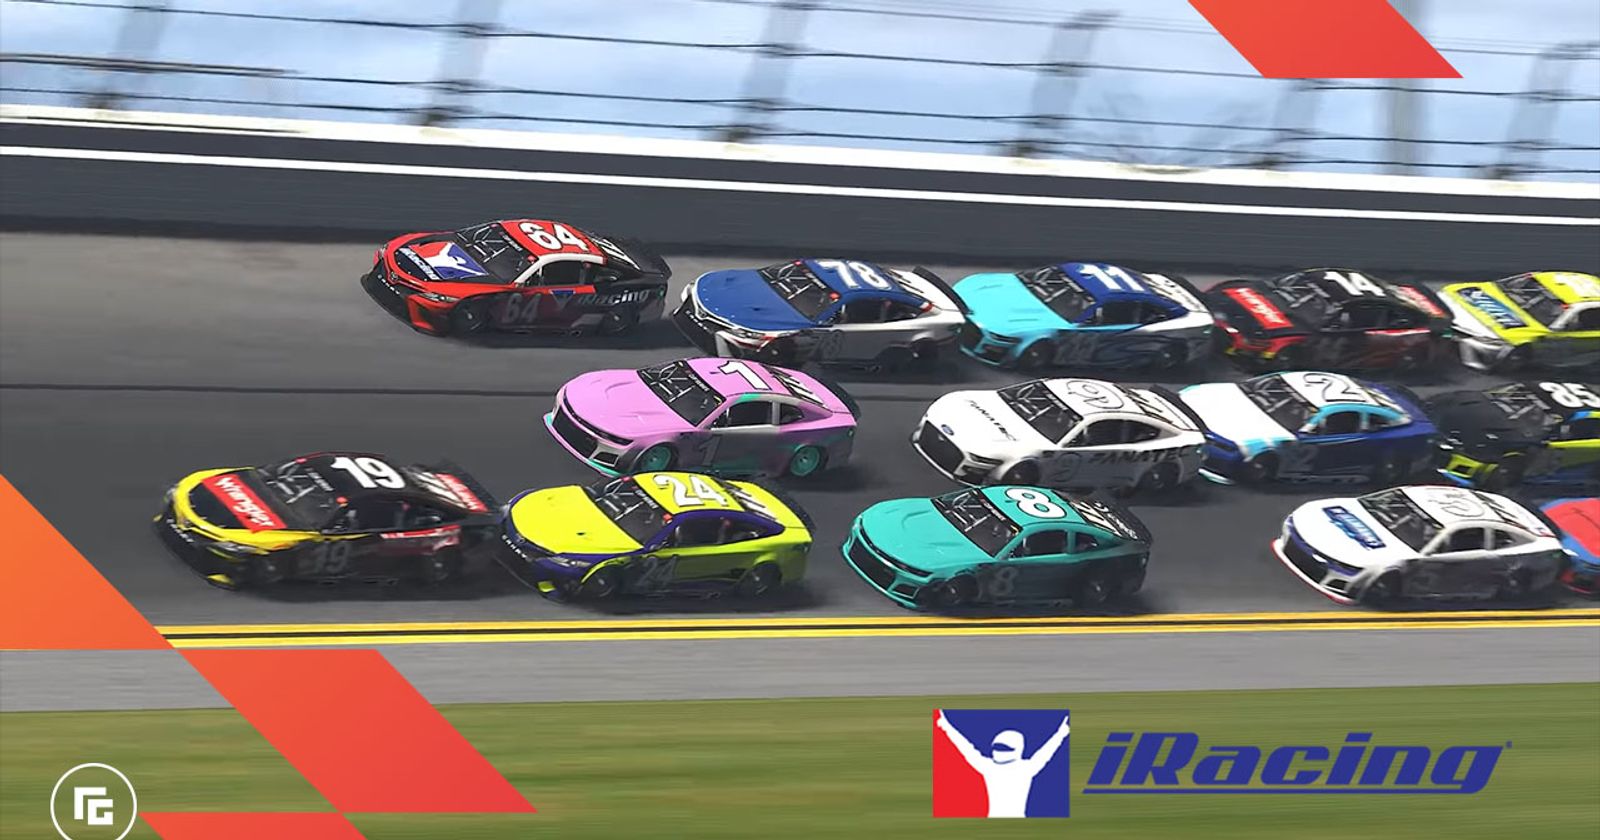 Introducing iRacing Auto Fuel 